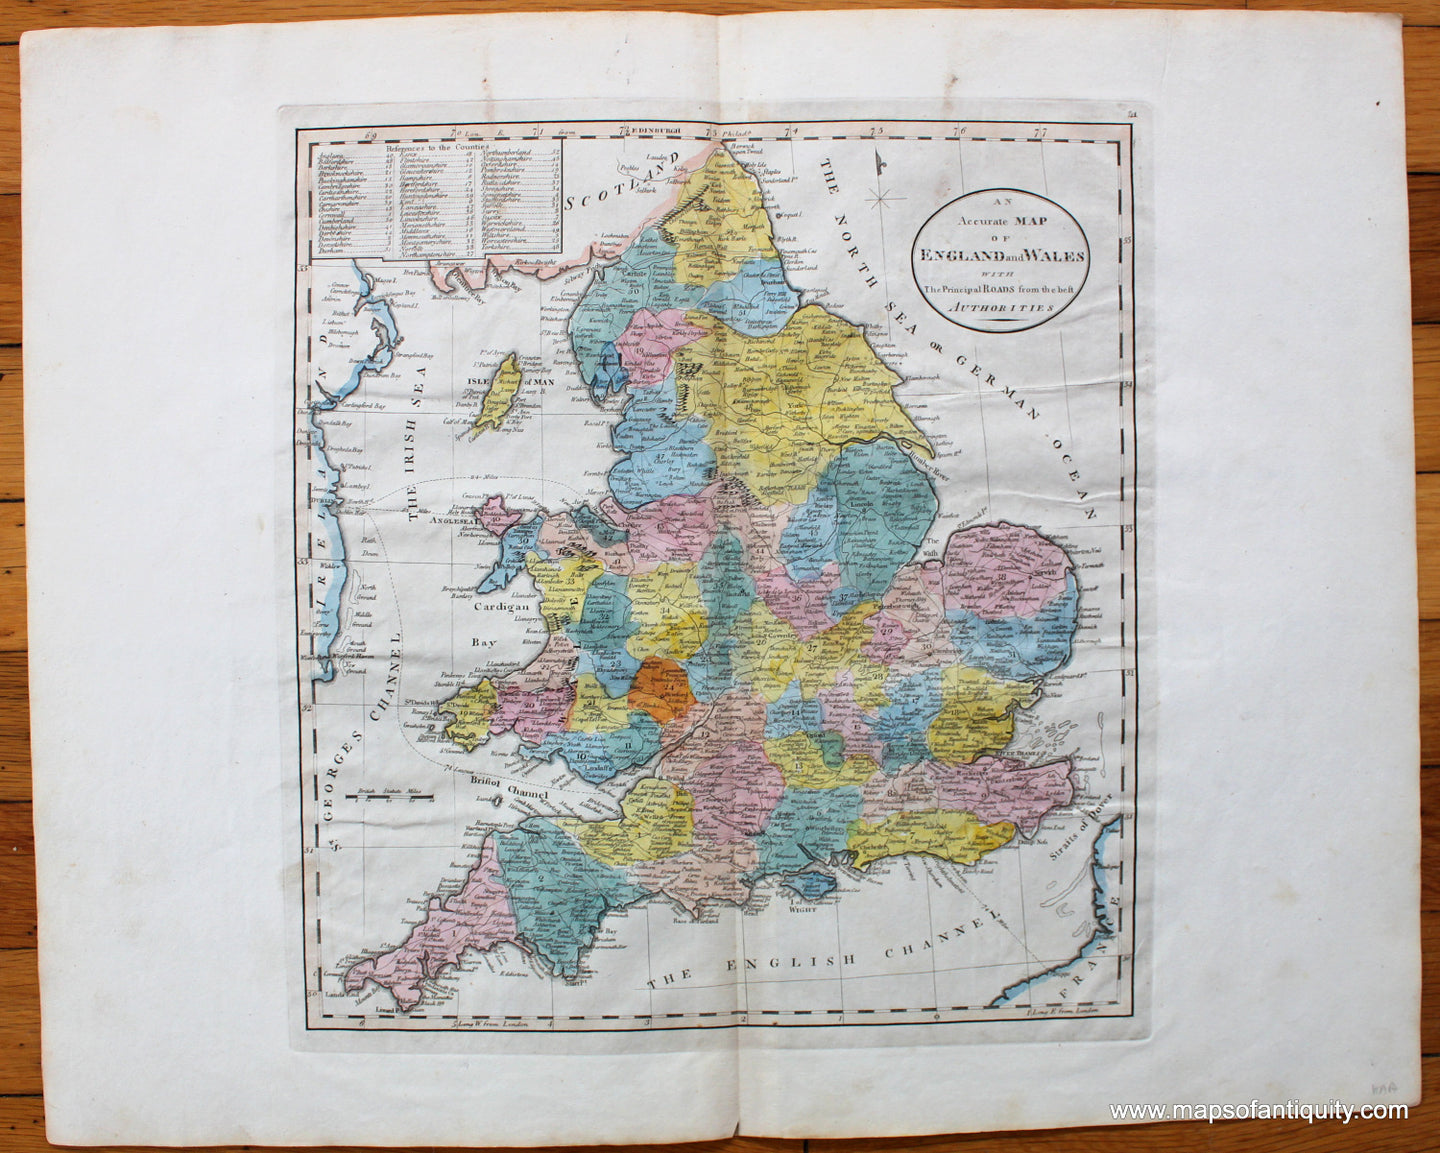 Antique-Hand-Colored-Map-An-Accurate-Map-of-England-and-Wales-with-the-Principal-Roads-from-the-Best-Authorities-Europe-England-1814-Carey-Maps-Of-Antiquity